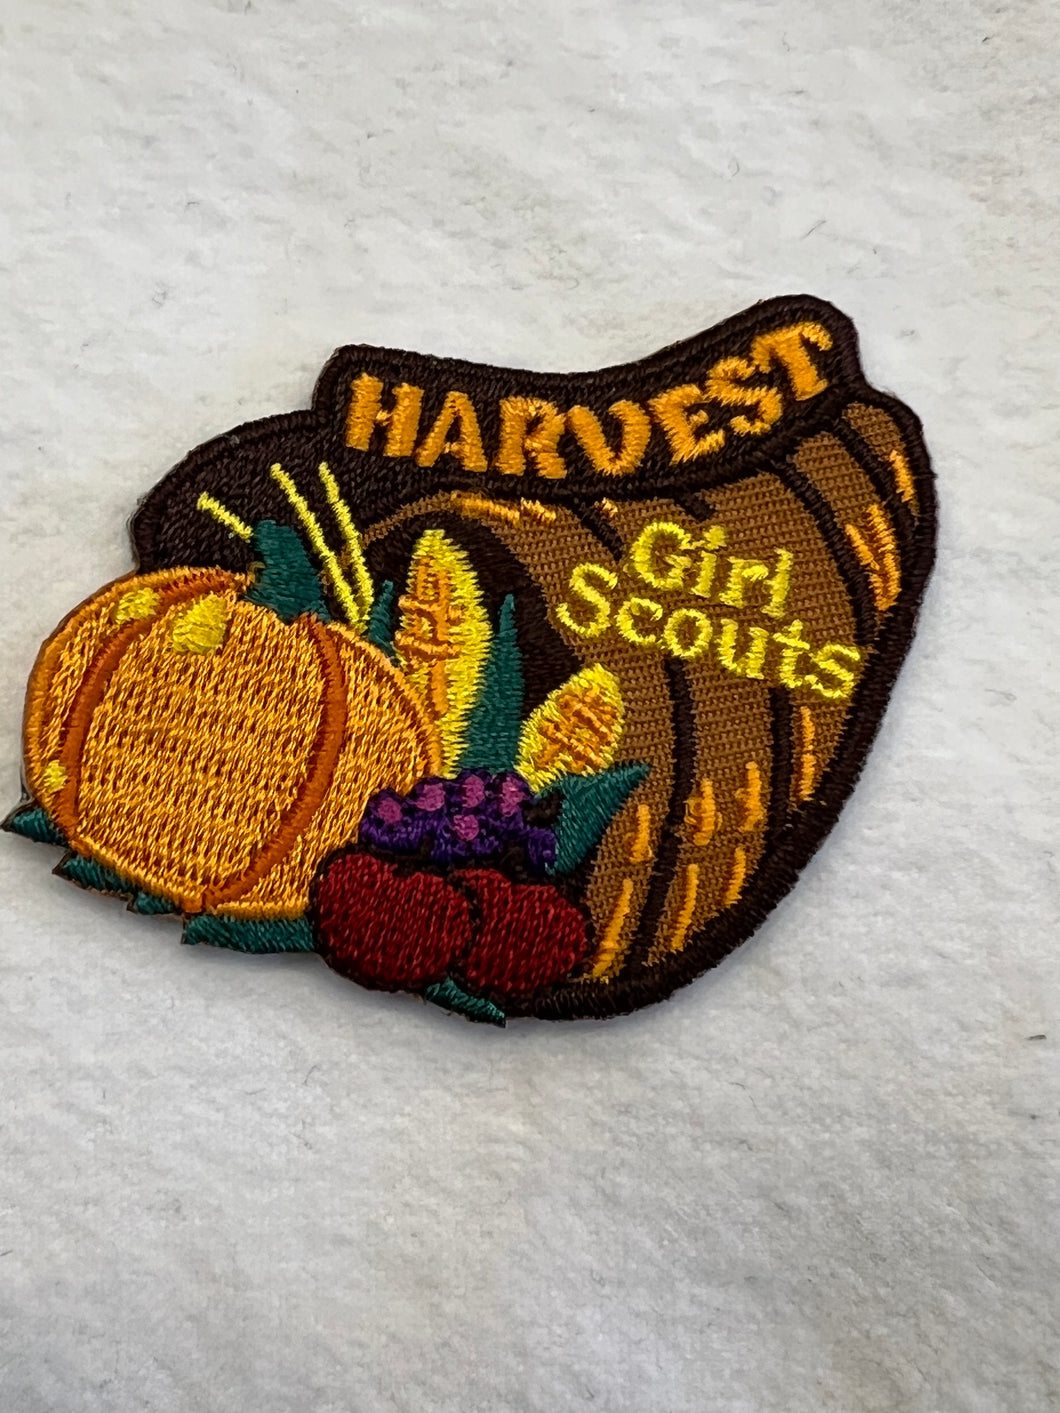 Harvest patch Girl Scouts